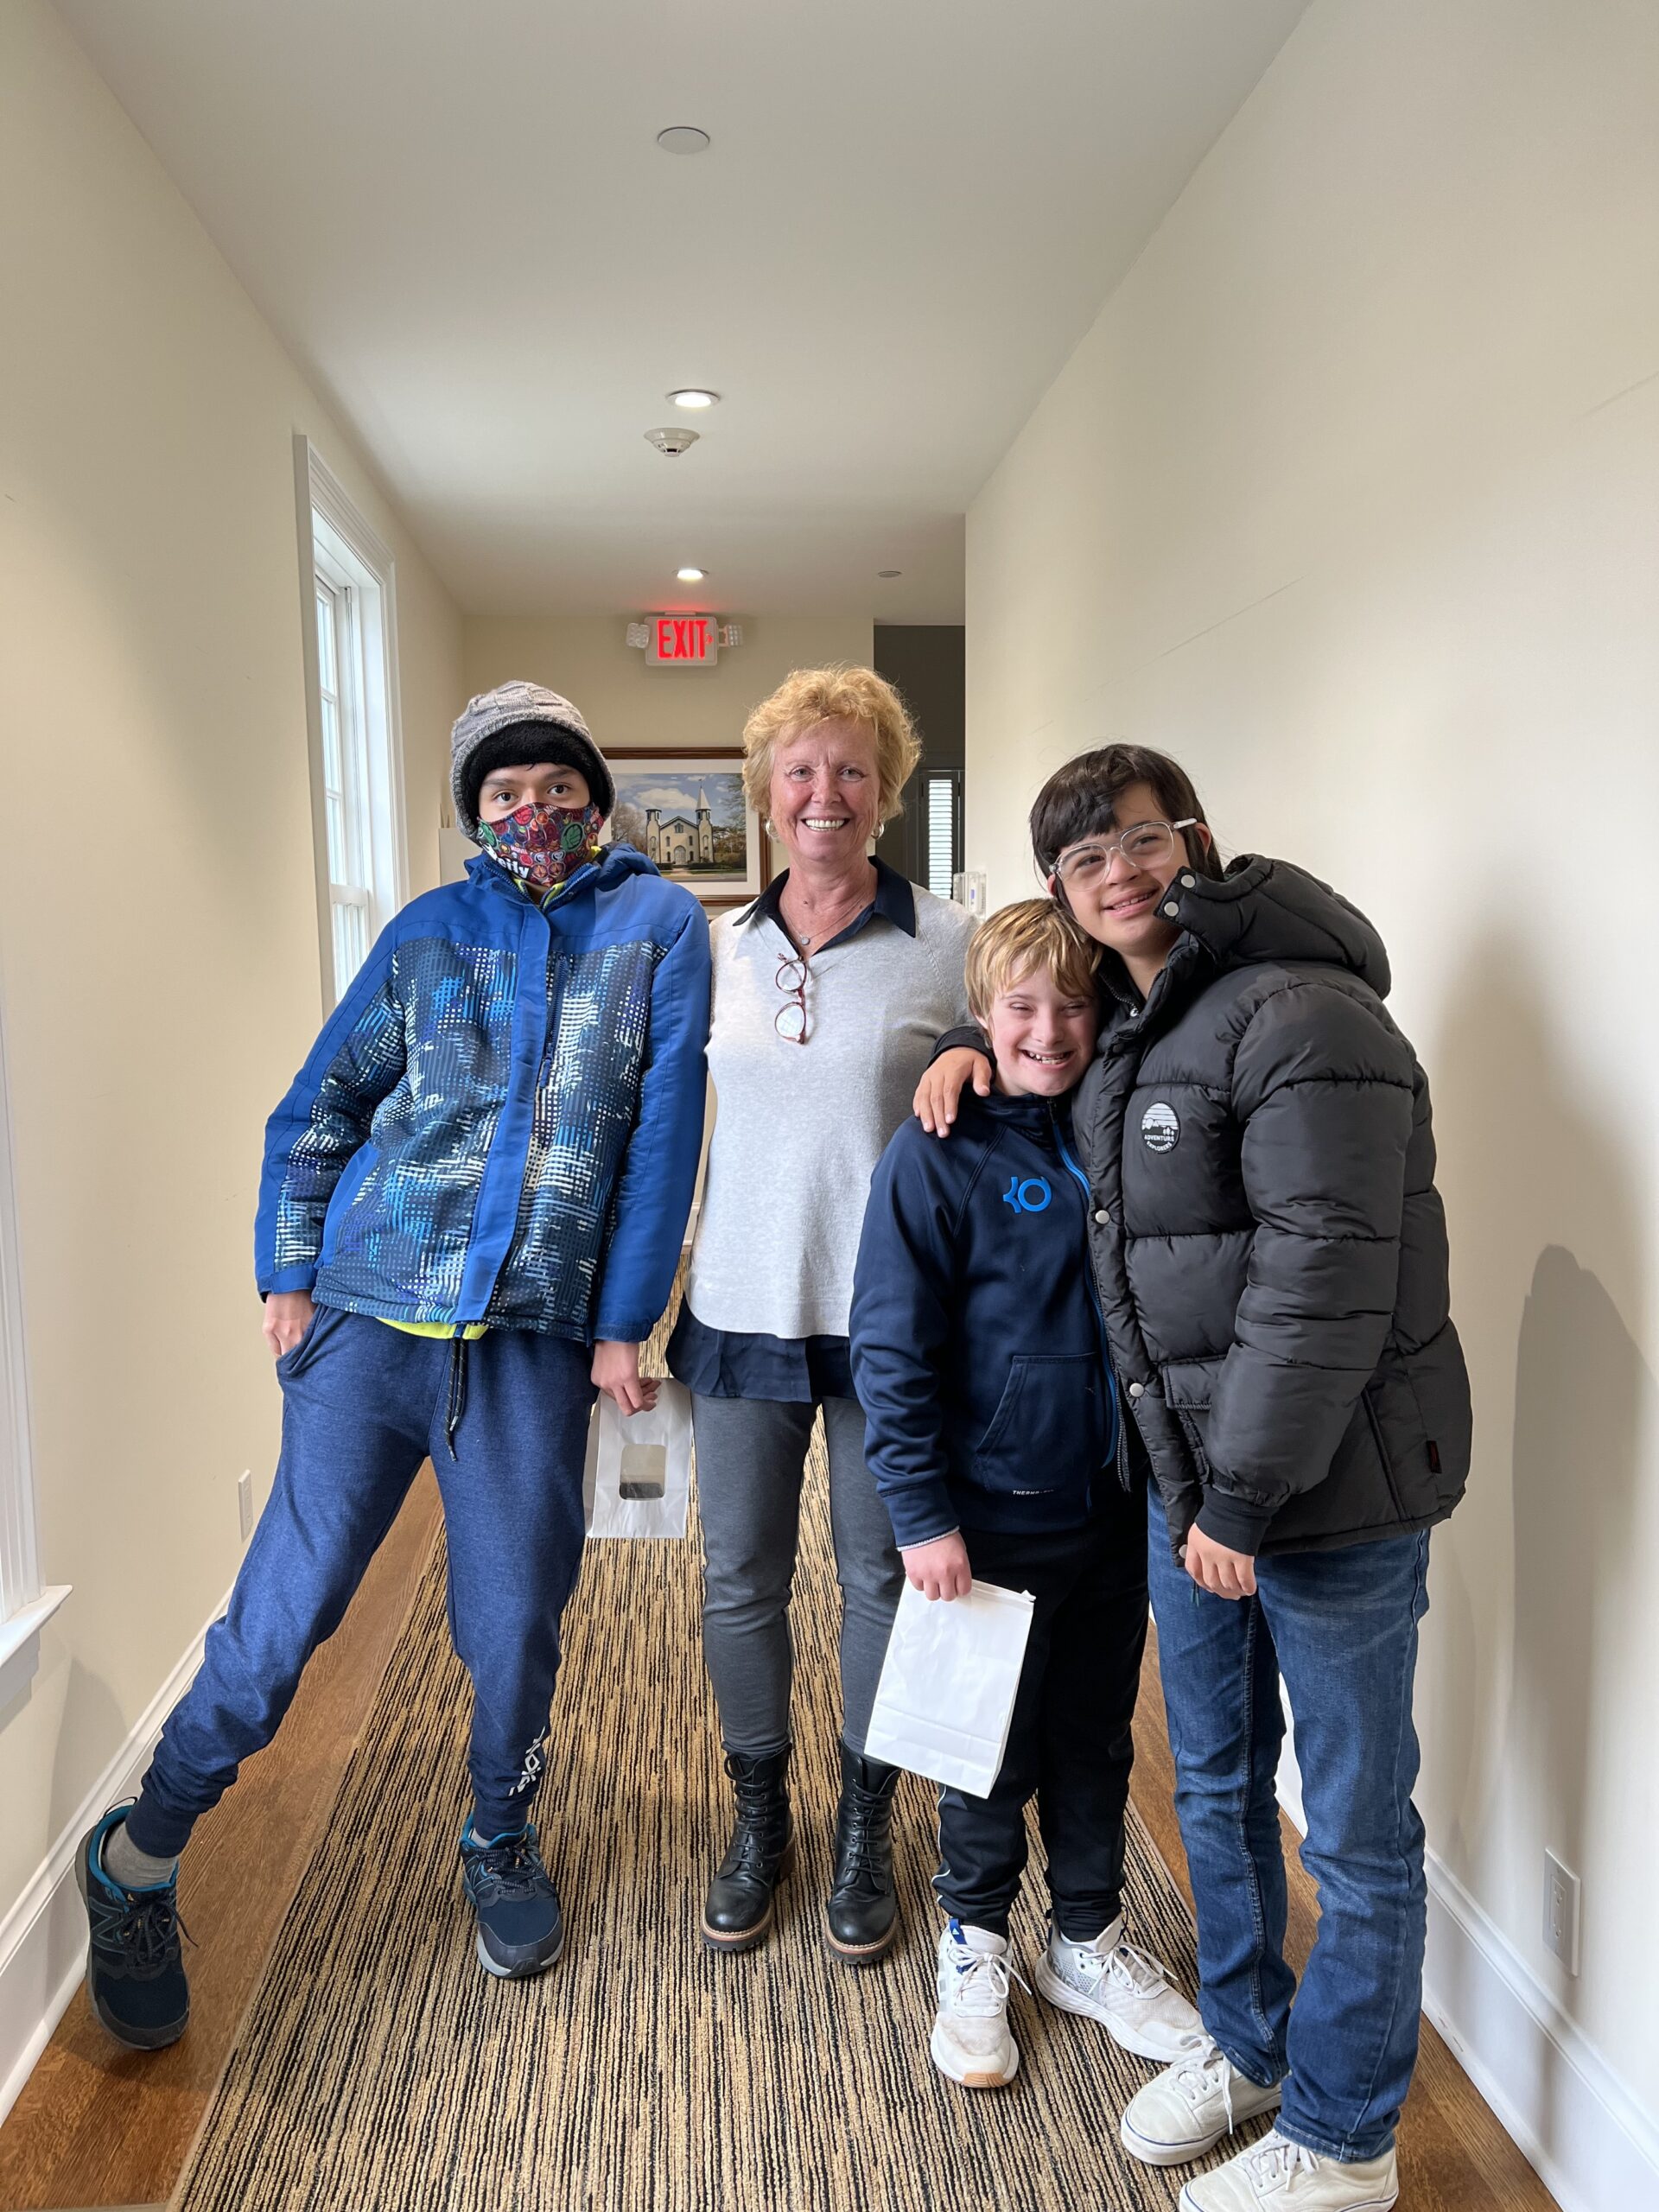 Pierson Middle School students, Shane Hartstein, Reily Simbana and Clash Zamora took a field trip to South Fork Bakery and met with business owner Shirley Ruch. COURTESY SAG HARBOR SCHOOL DISTRICT